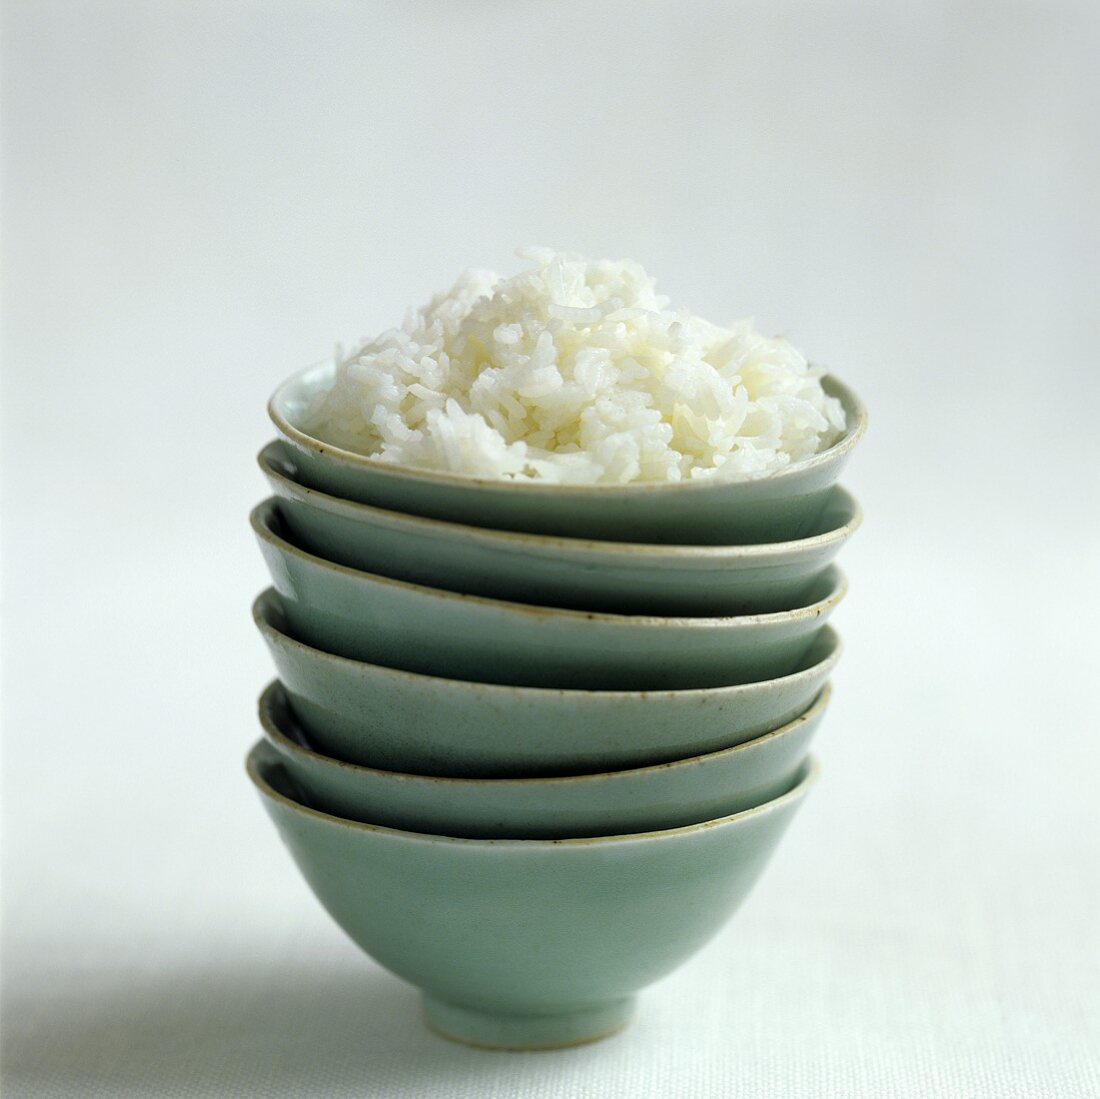 Bowl of rice on a pile of bowls